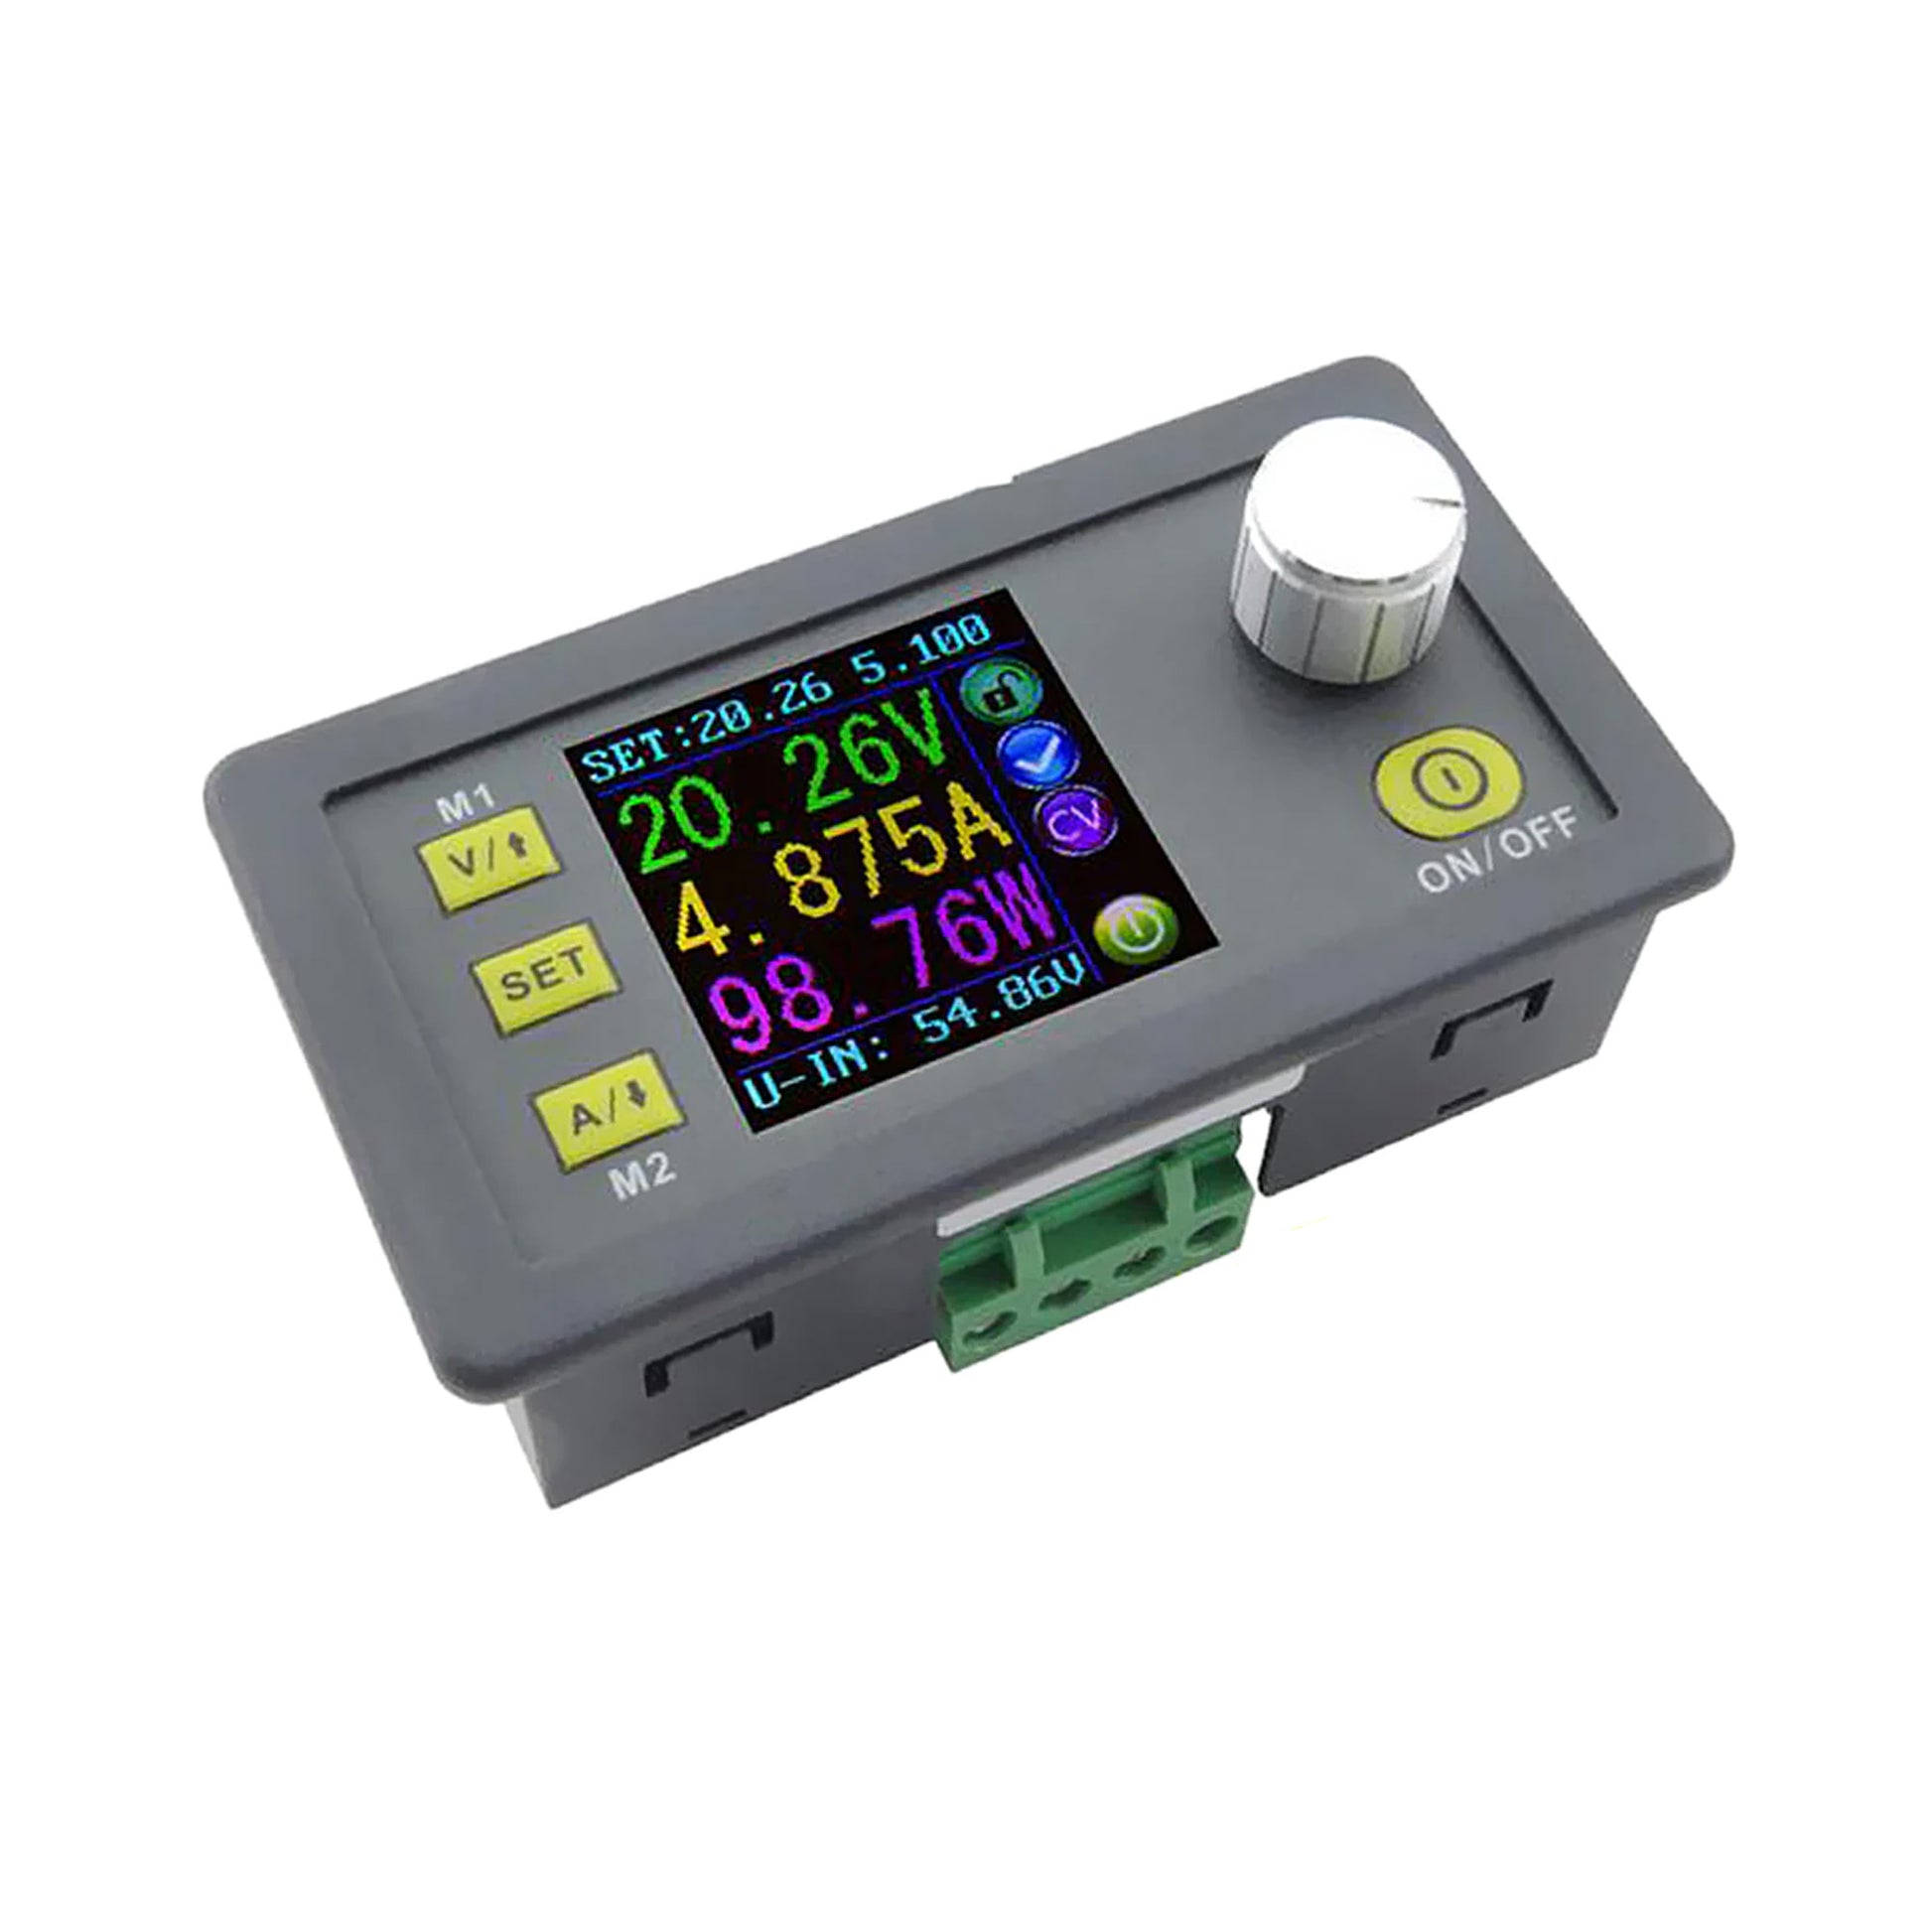 DPS5005 50V 5A Buck Adjustable DC Constant Voltage Power Supply Module Integrated Voltmeter Ammeter With Color Display - REES52